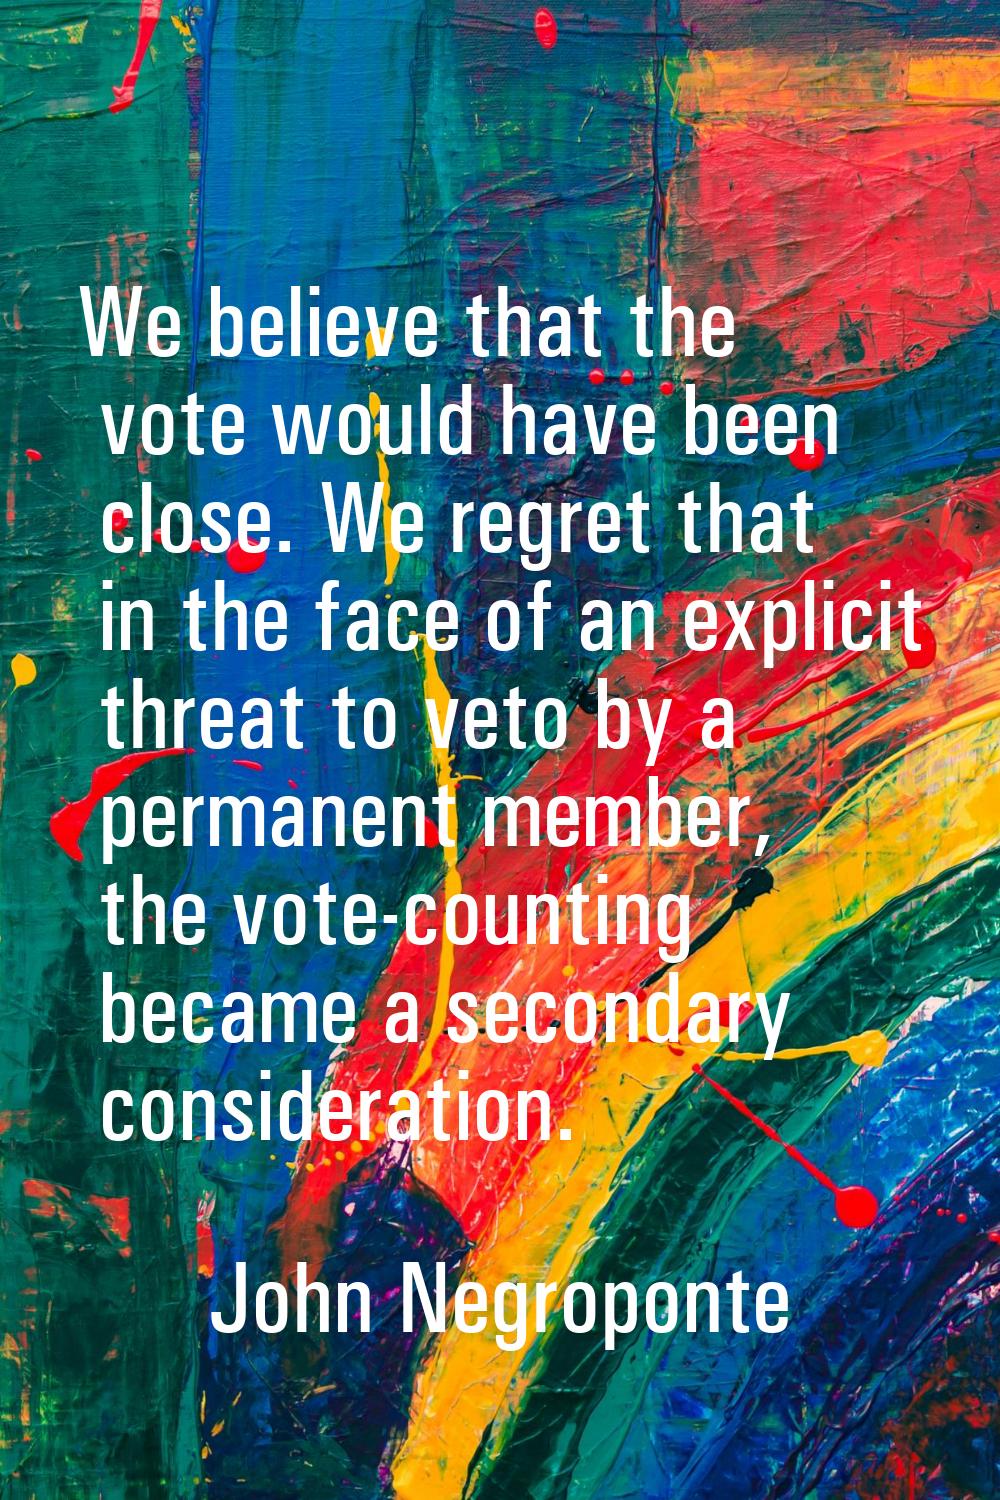 We believe that the vote would have been close. We regret that in the face of an explicit threat to